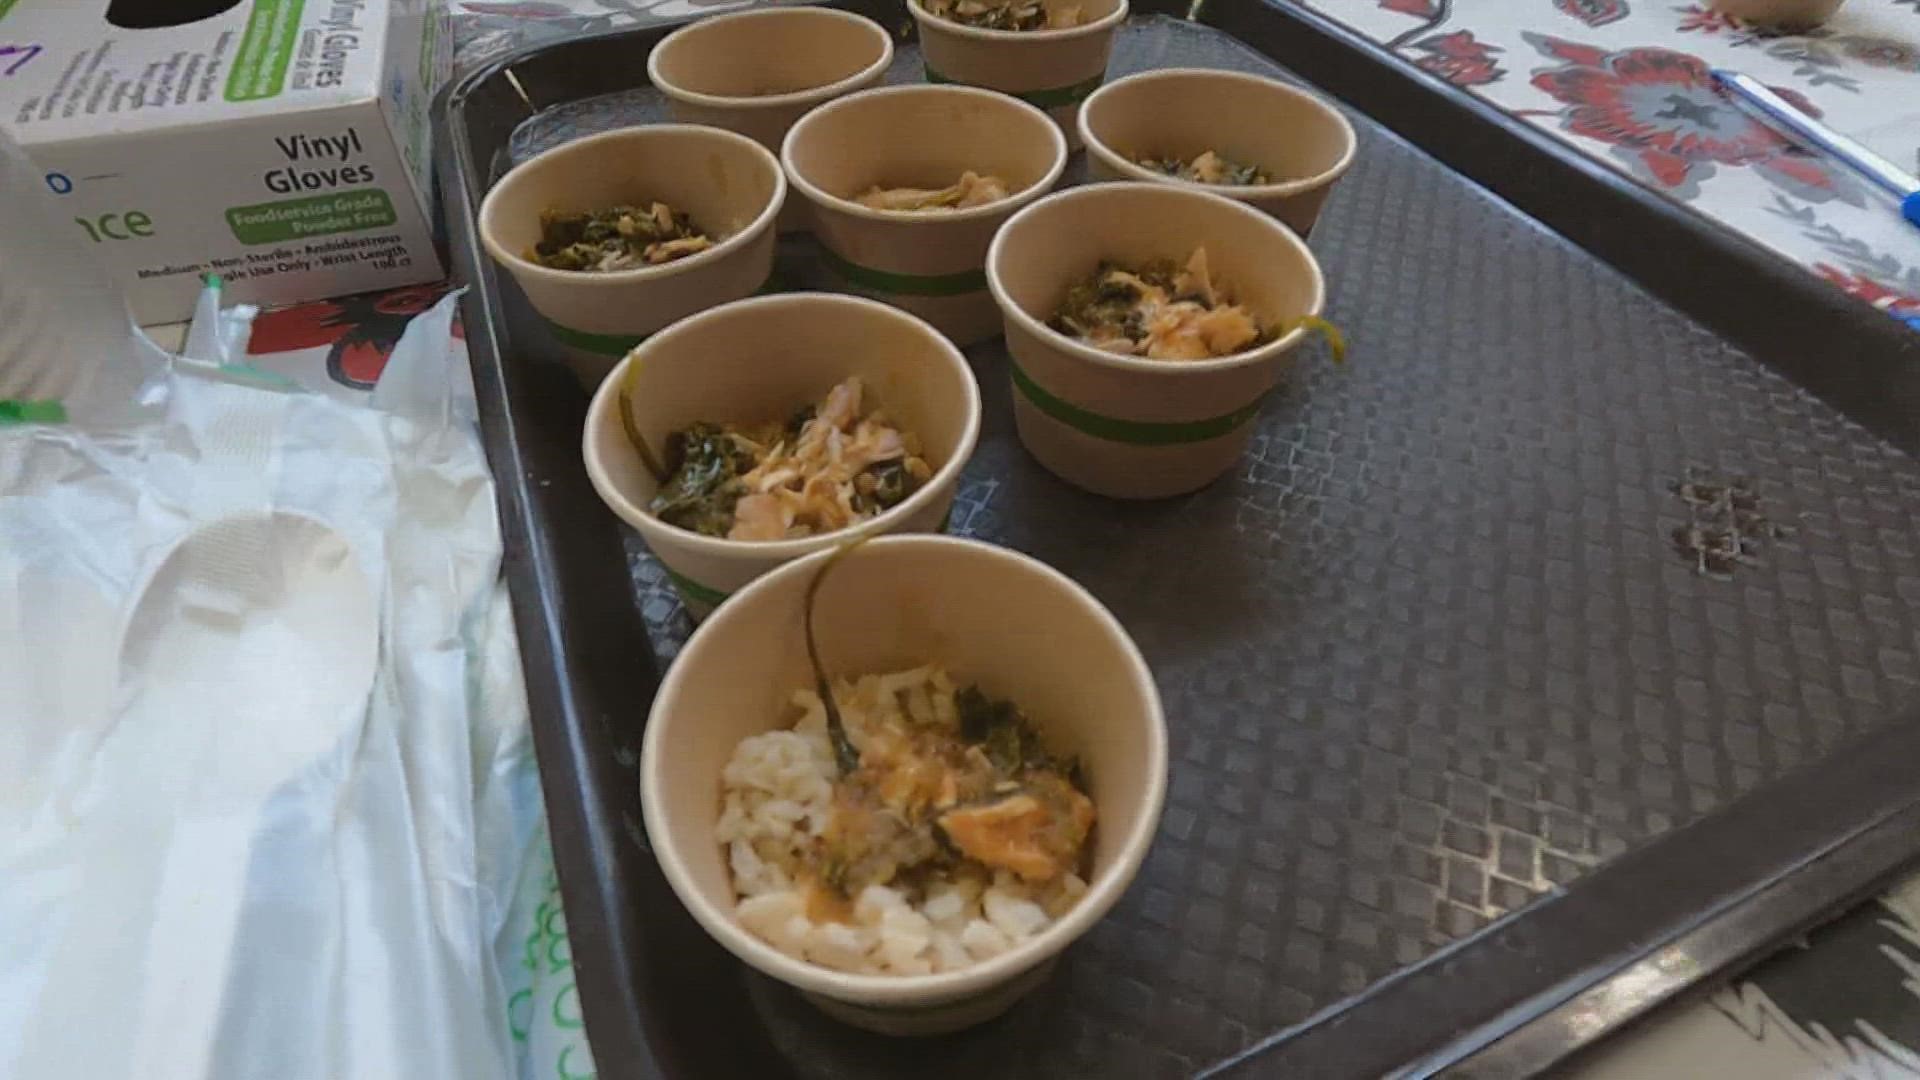 After success in Westbrook, local chefs have been gathering taste test results from students and will add three recipes to Portland lunches in the fall.